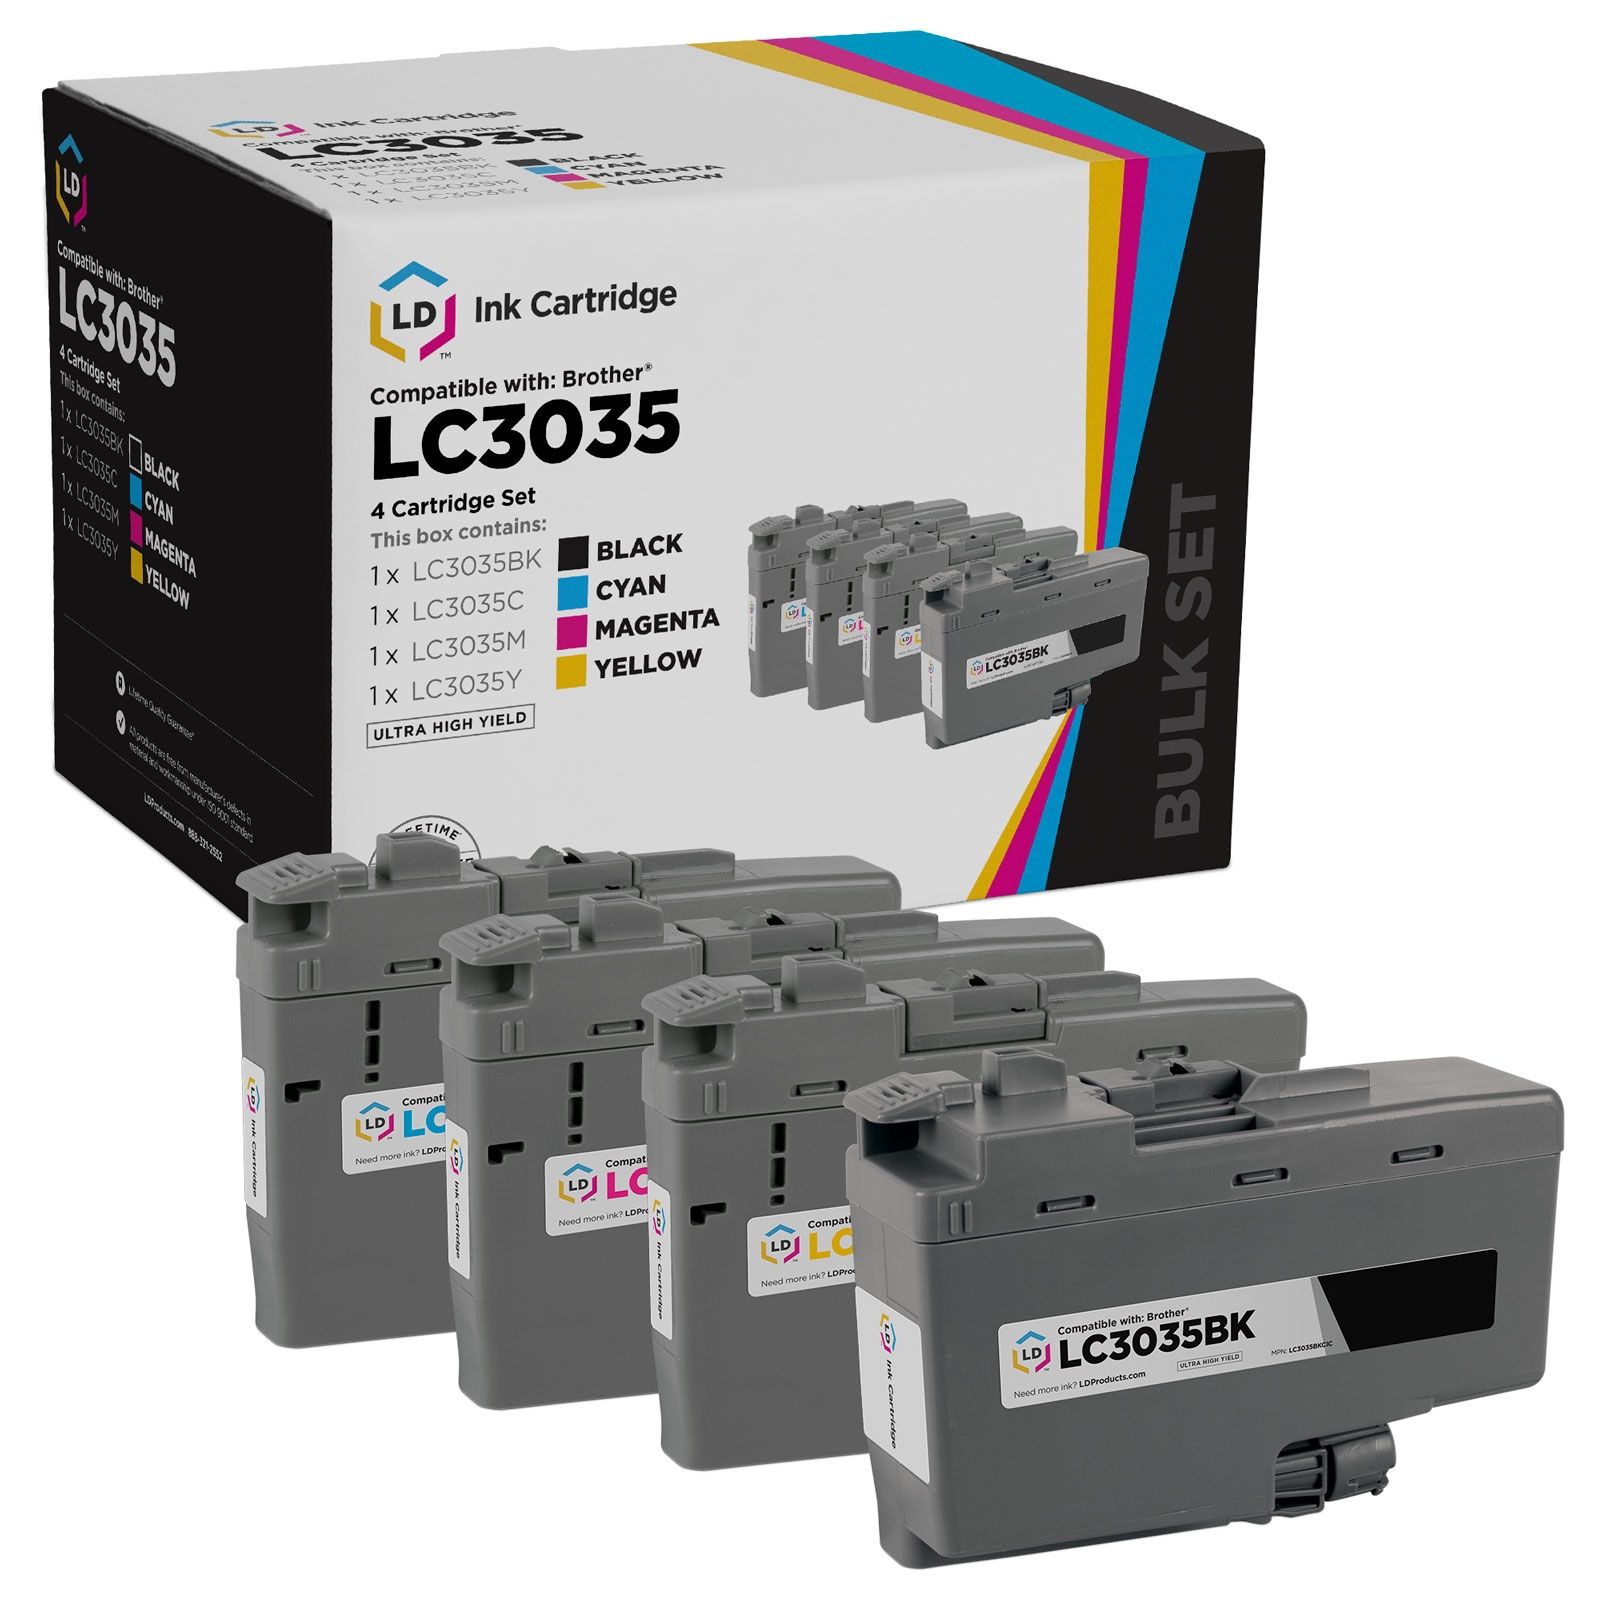 koffie creatief Pennenvriend Affordable 4-Cartridge Set For Brother LC3035 Ultra HY Ink - LD Products